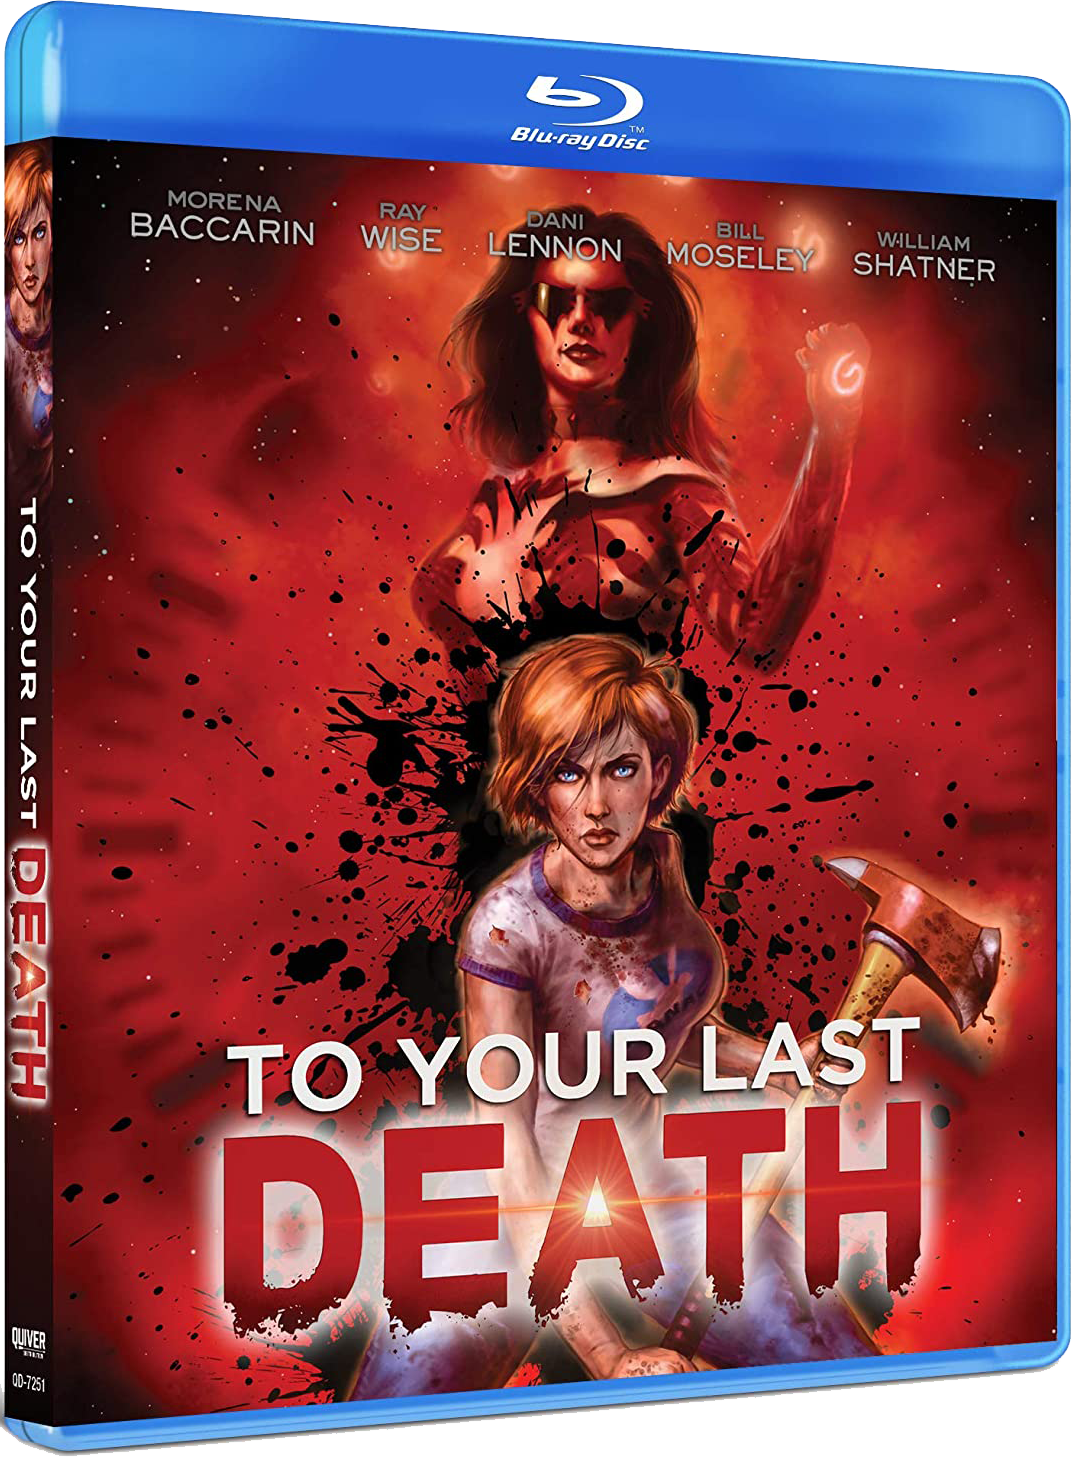 To Your Last Death Blu-ray